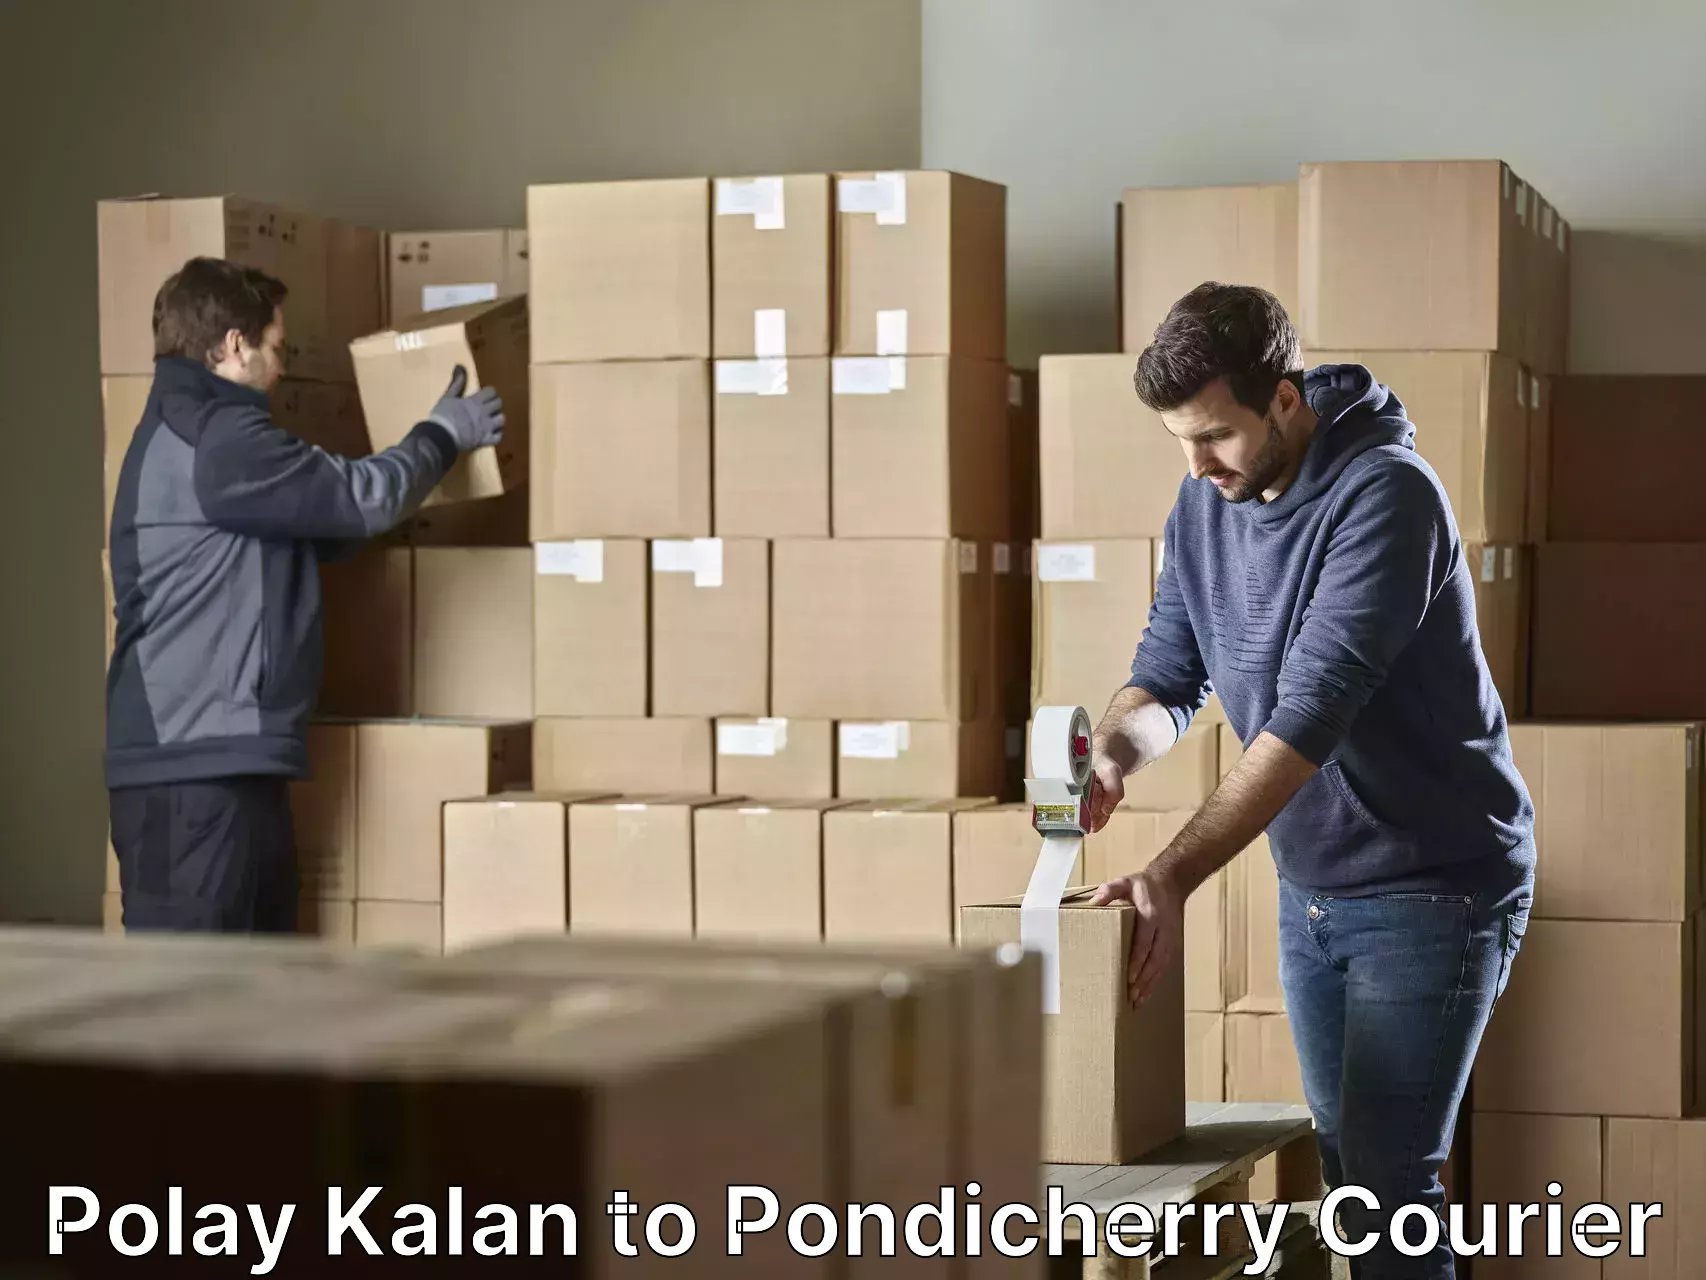 Professional moving assistance Polay Kalan to Pondicherry